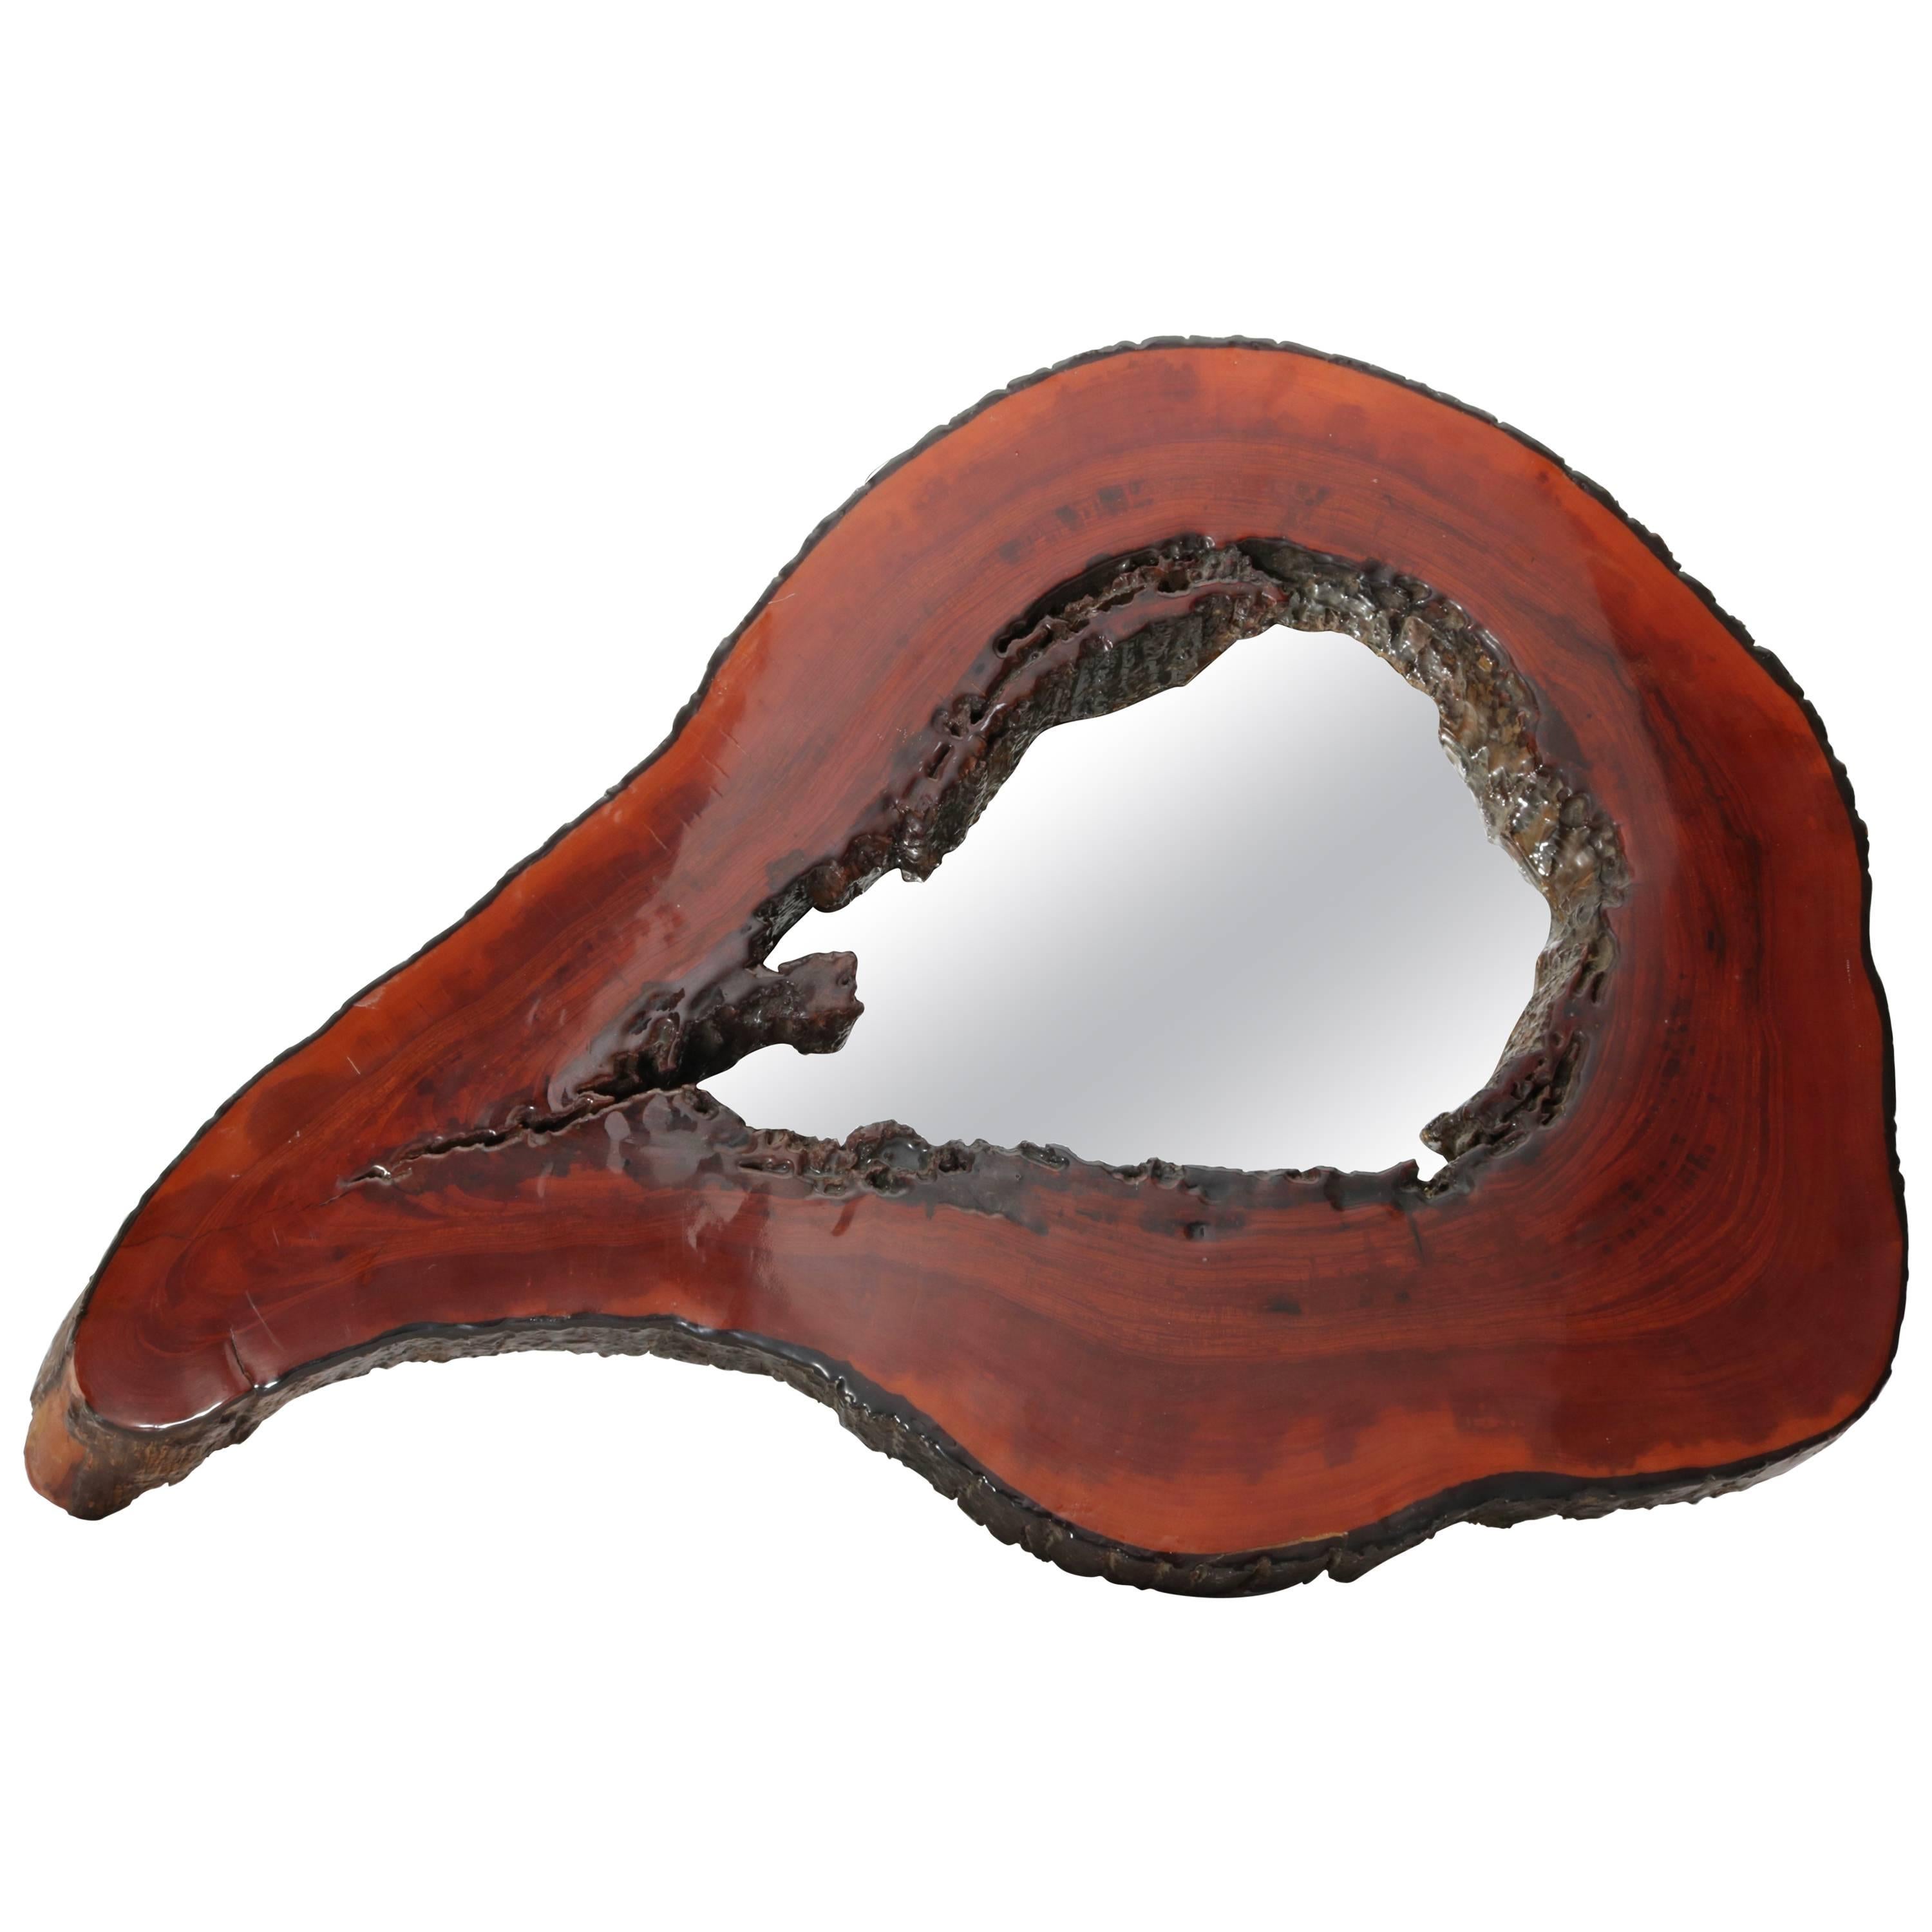 Cypress Tree Biomorphic Form Wall Mirror For Sale